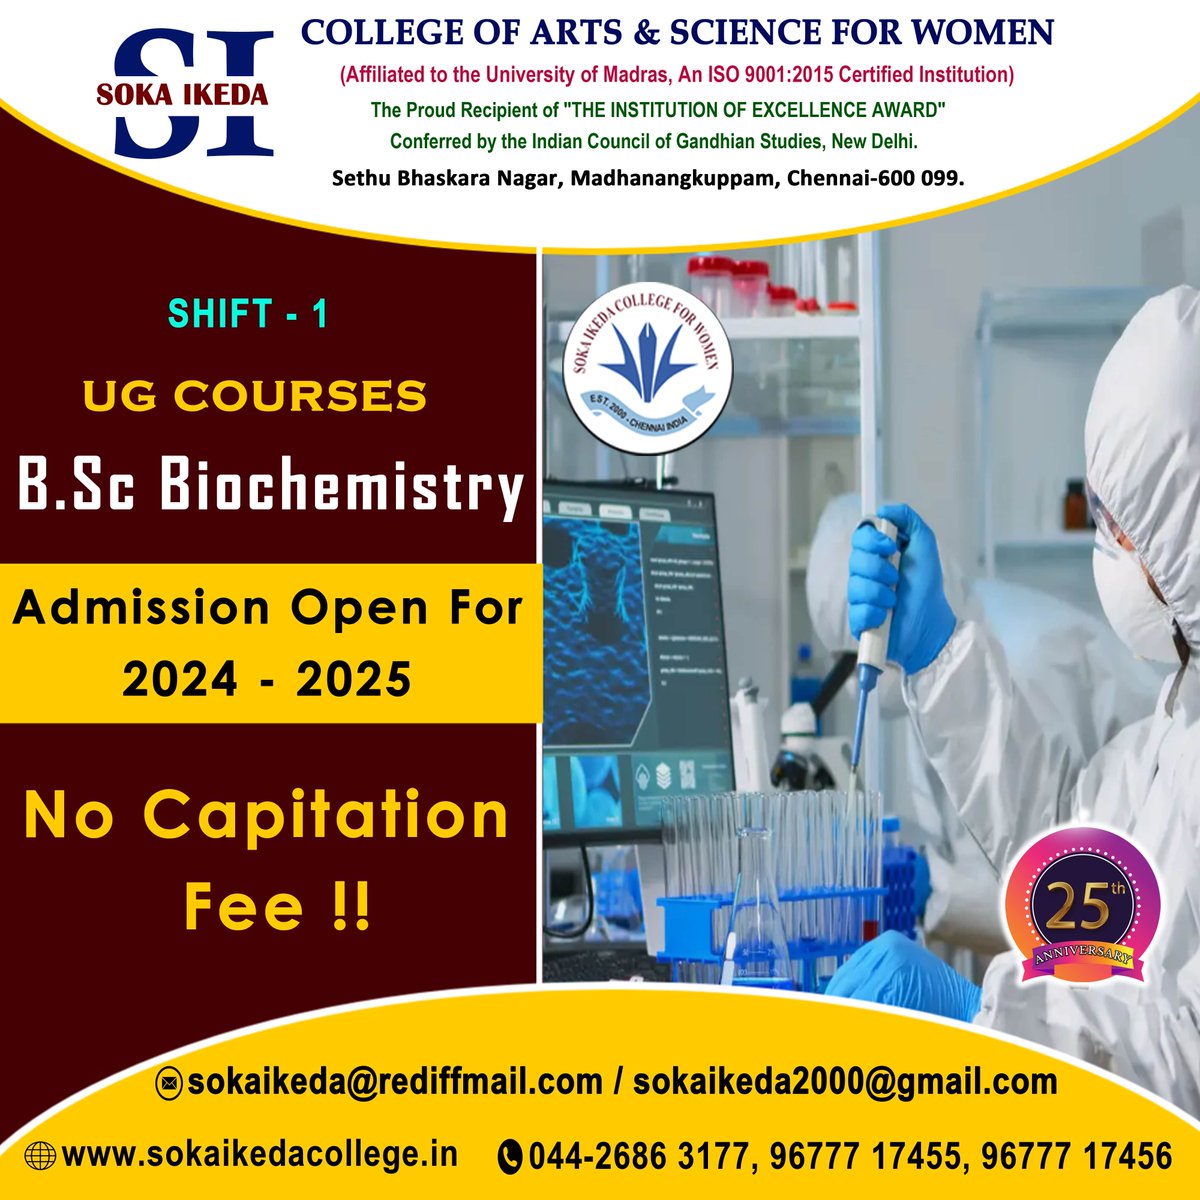 𝐁.𝐒𝐜 -𝐁𝐢𝐨𝐜𝐡𝐞𝐦𝐢𝐬𝐭𝐫𝐲
Contact Details: 
Soka Ikeda College of Arts and Science for Women
Online Admission: sokaikedacollege.in/#/online-submi…
Website: sokaikedacollege.in
Phone Number: 044-2686 3177, 96777 17455, 96777 17456
#BScBiochemistry #SokaIkedaCollege #coursesoffer